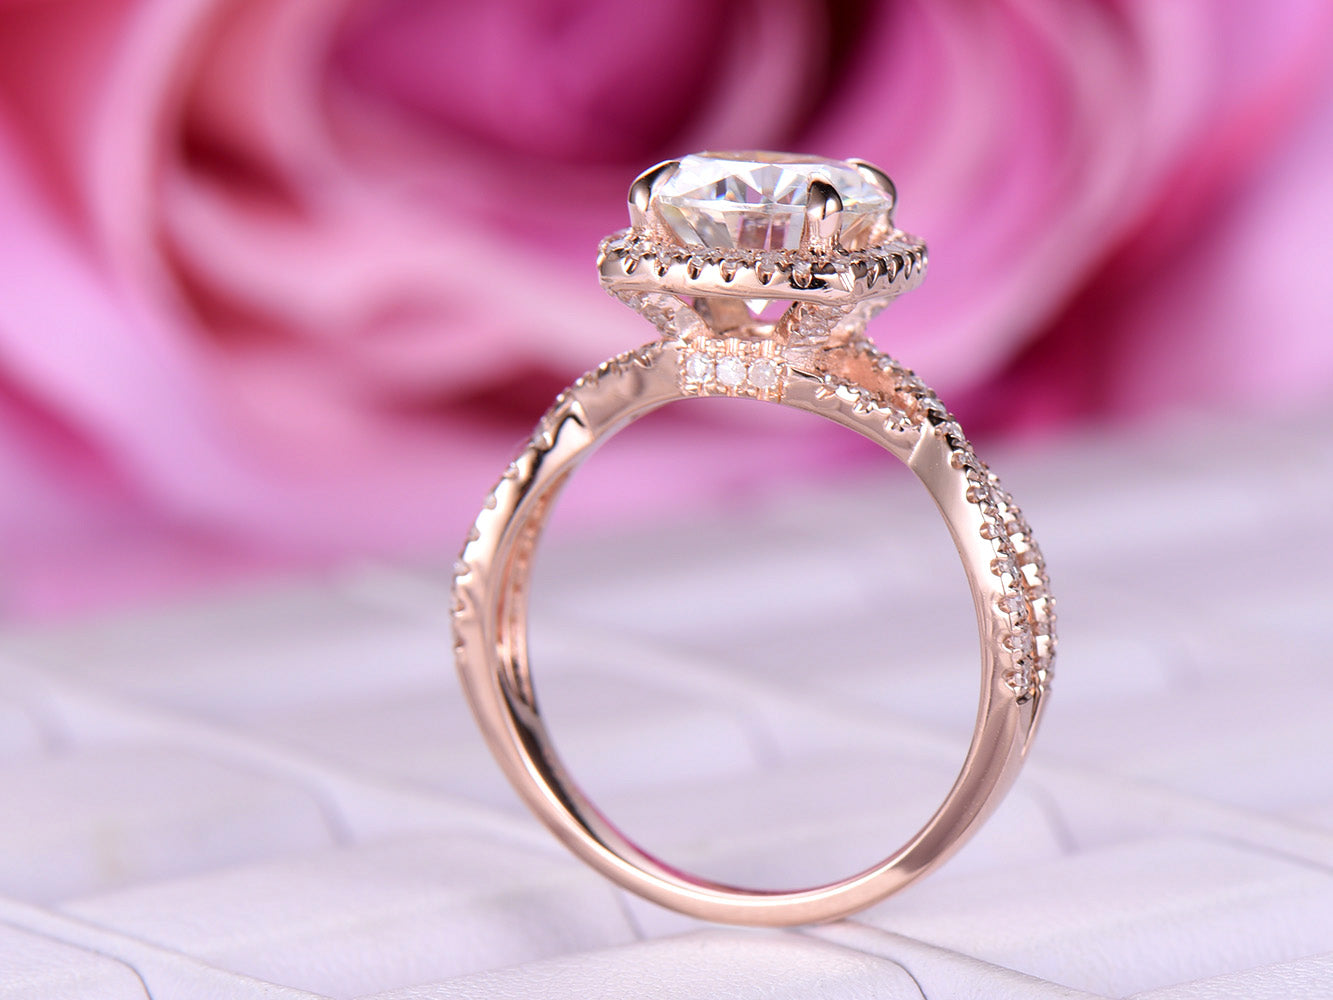 Reserved for JP 1st payment  7.5mm Round FB Moissanie Ring Infinite Love Shank 14K Rose Gold